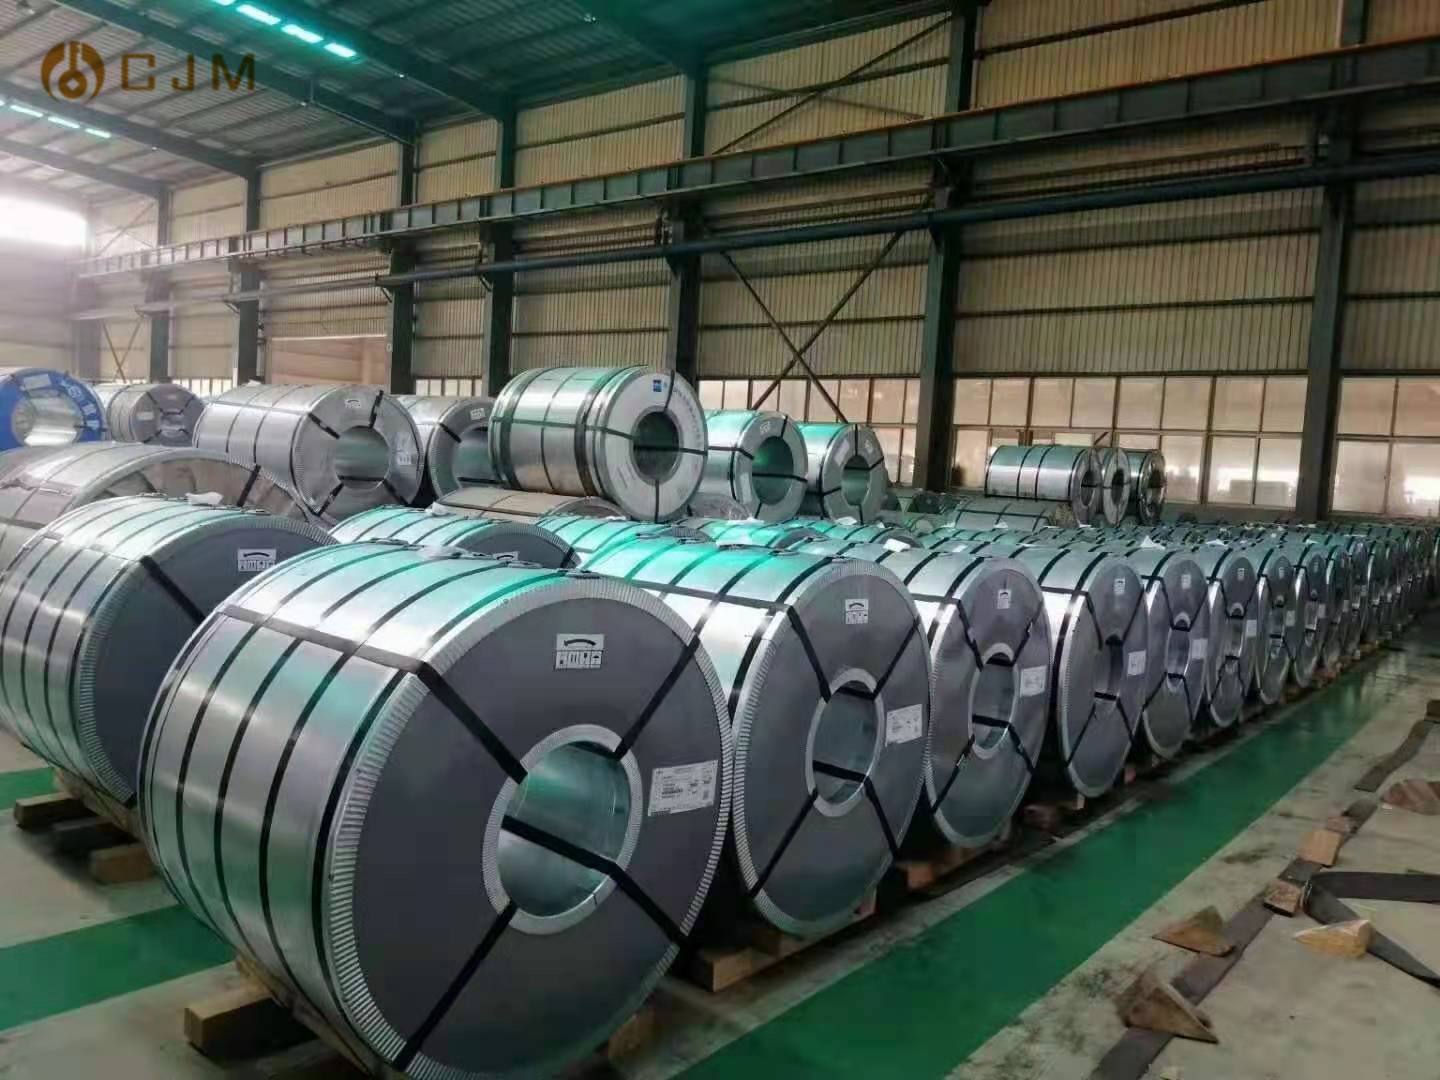 Type 631 Brushed Coloured Cold Rolled Stainless Steel Coil